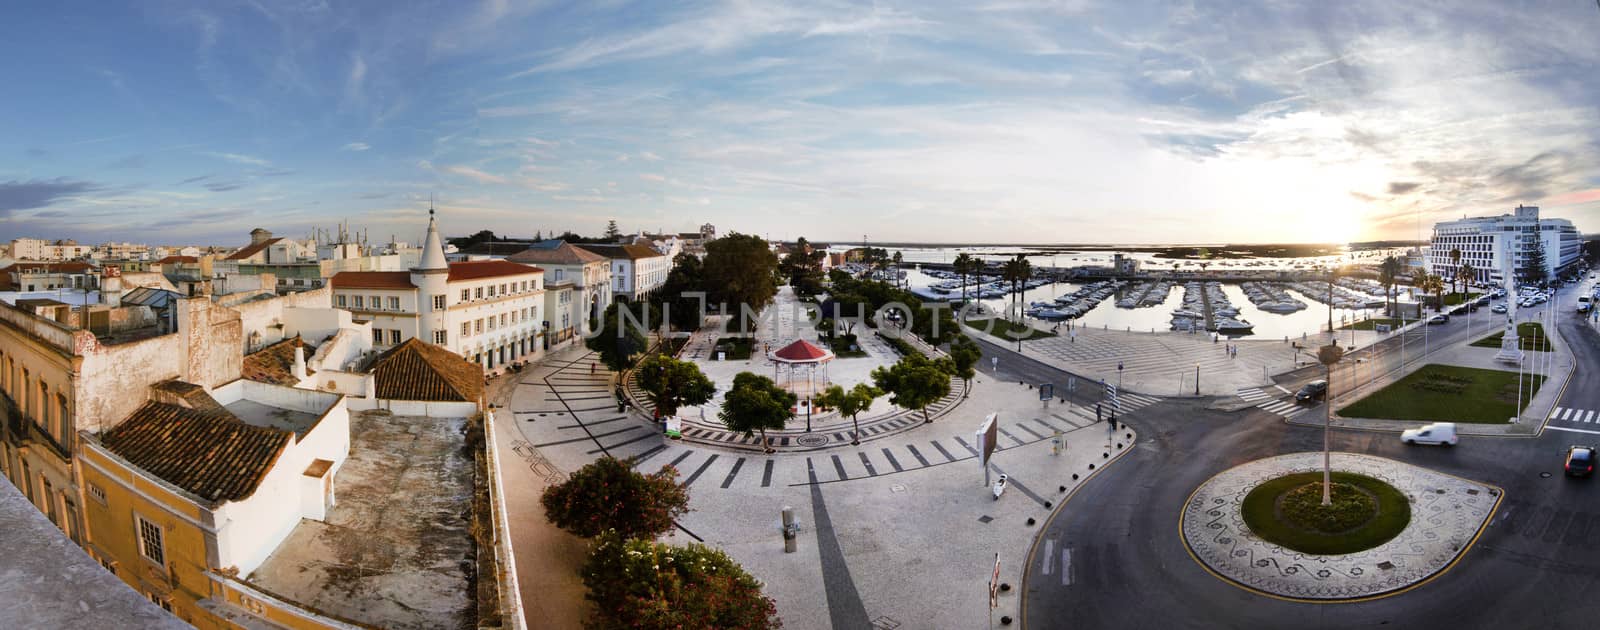 Wide view of the downtown area of Faro, Portugal.